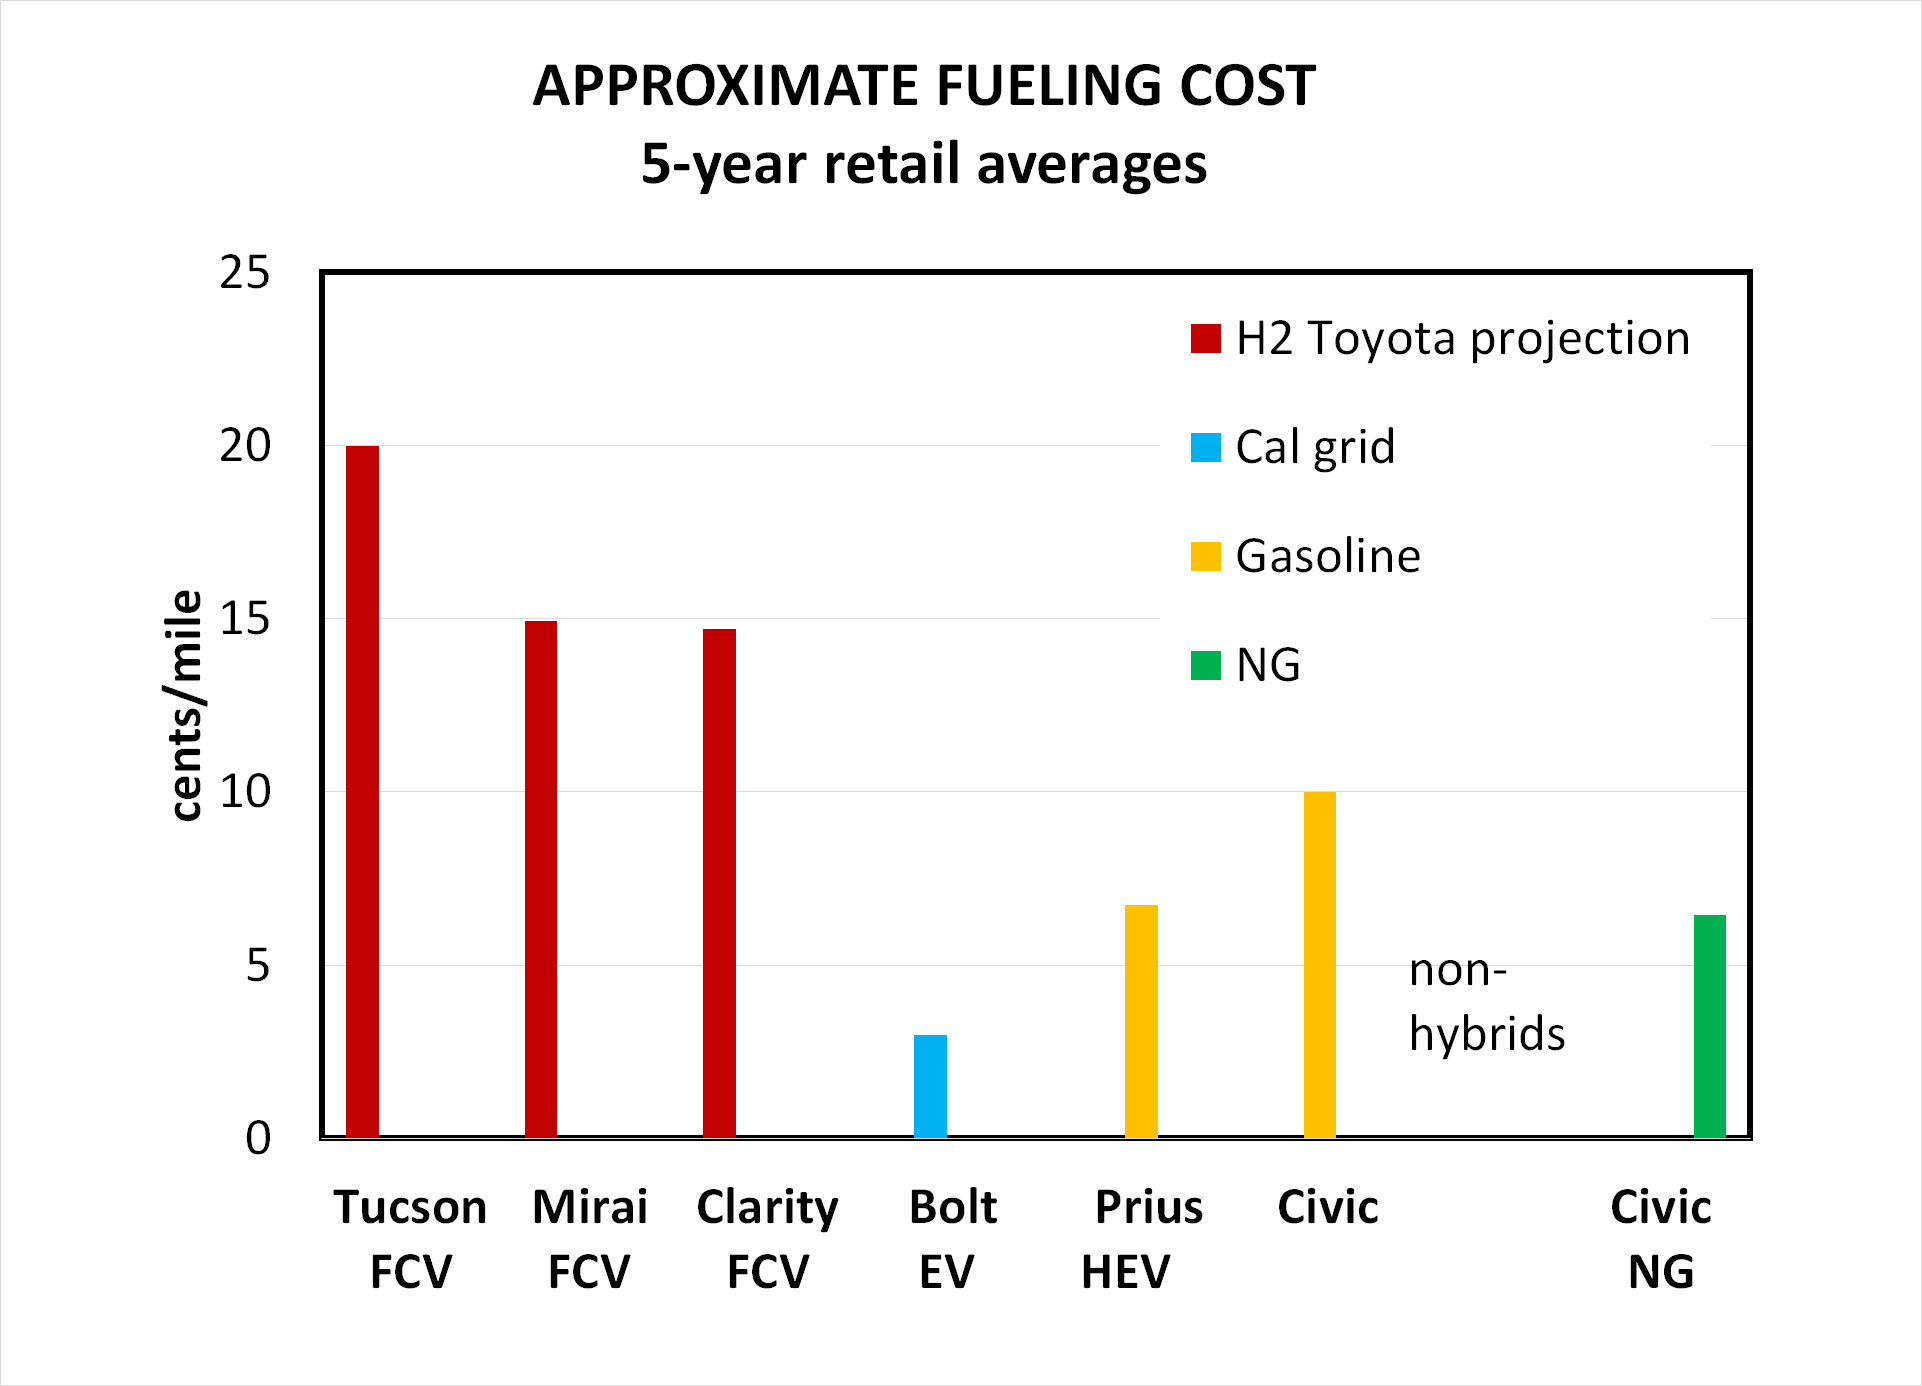 Energy use for hydrogen fuelcell vehicles higher than electrics, even